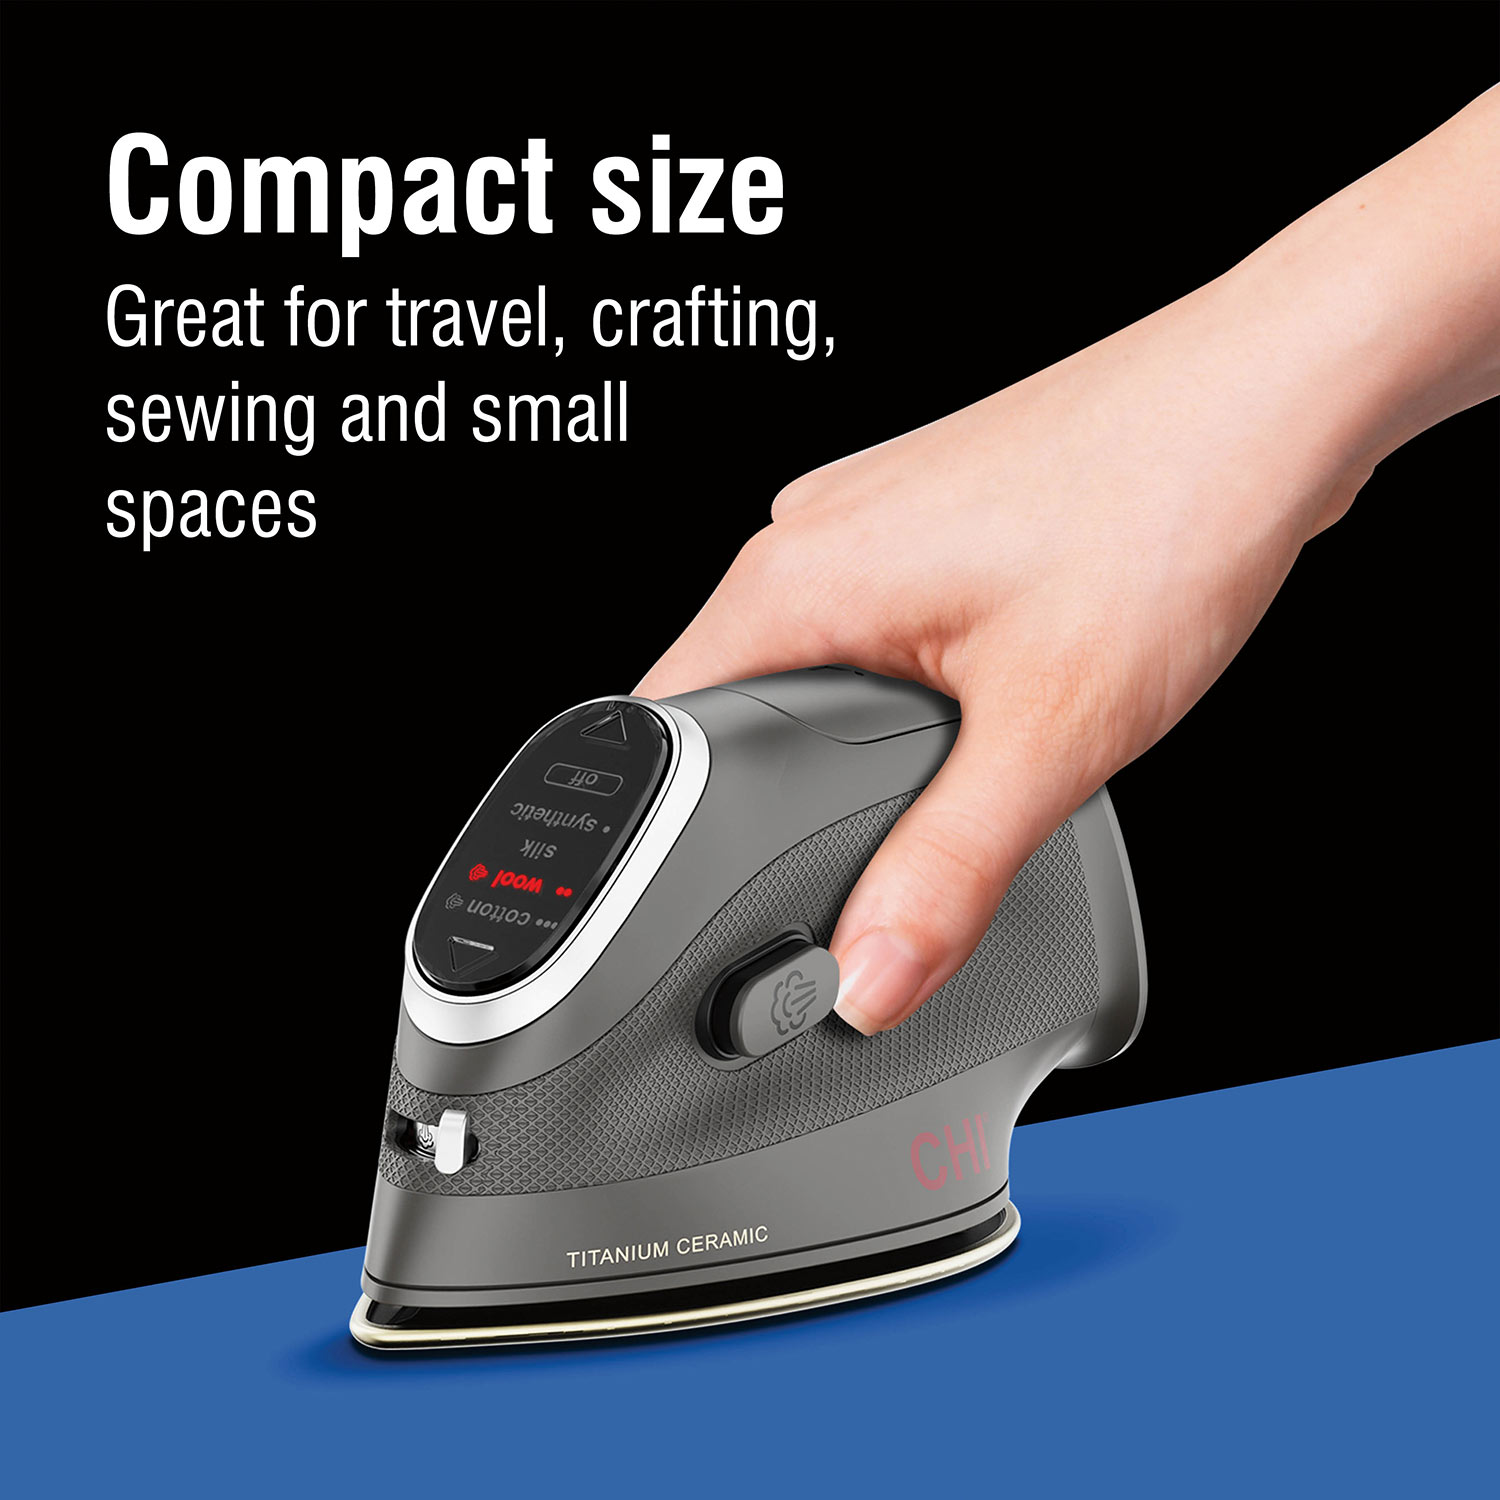 Compact size that is great for travel, crafting, sewing and small spaces